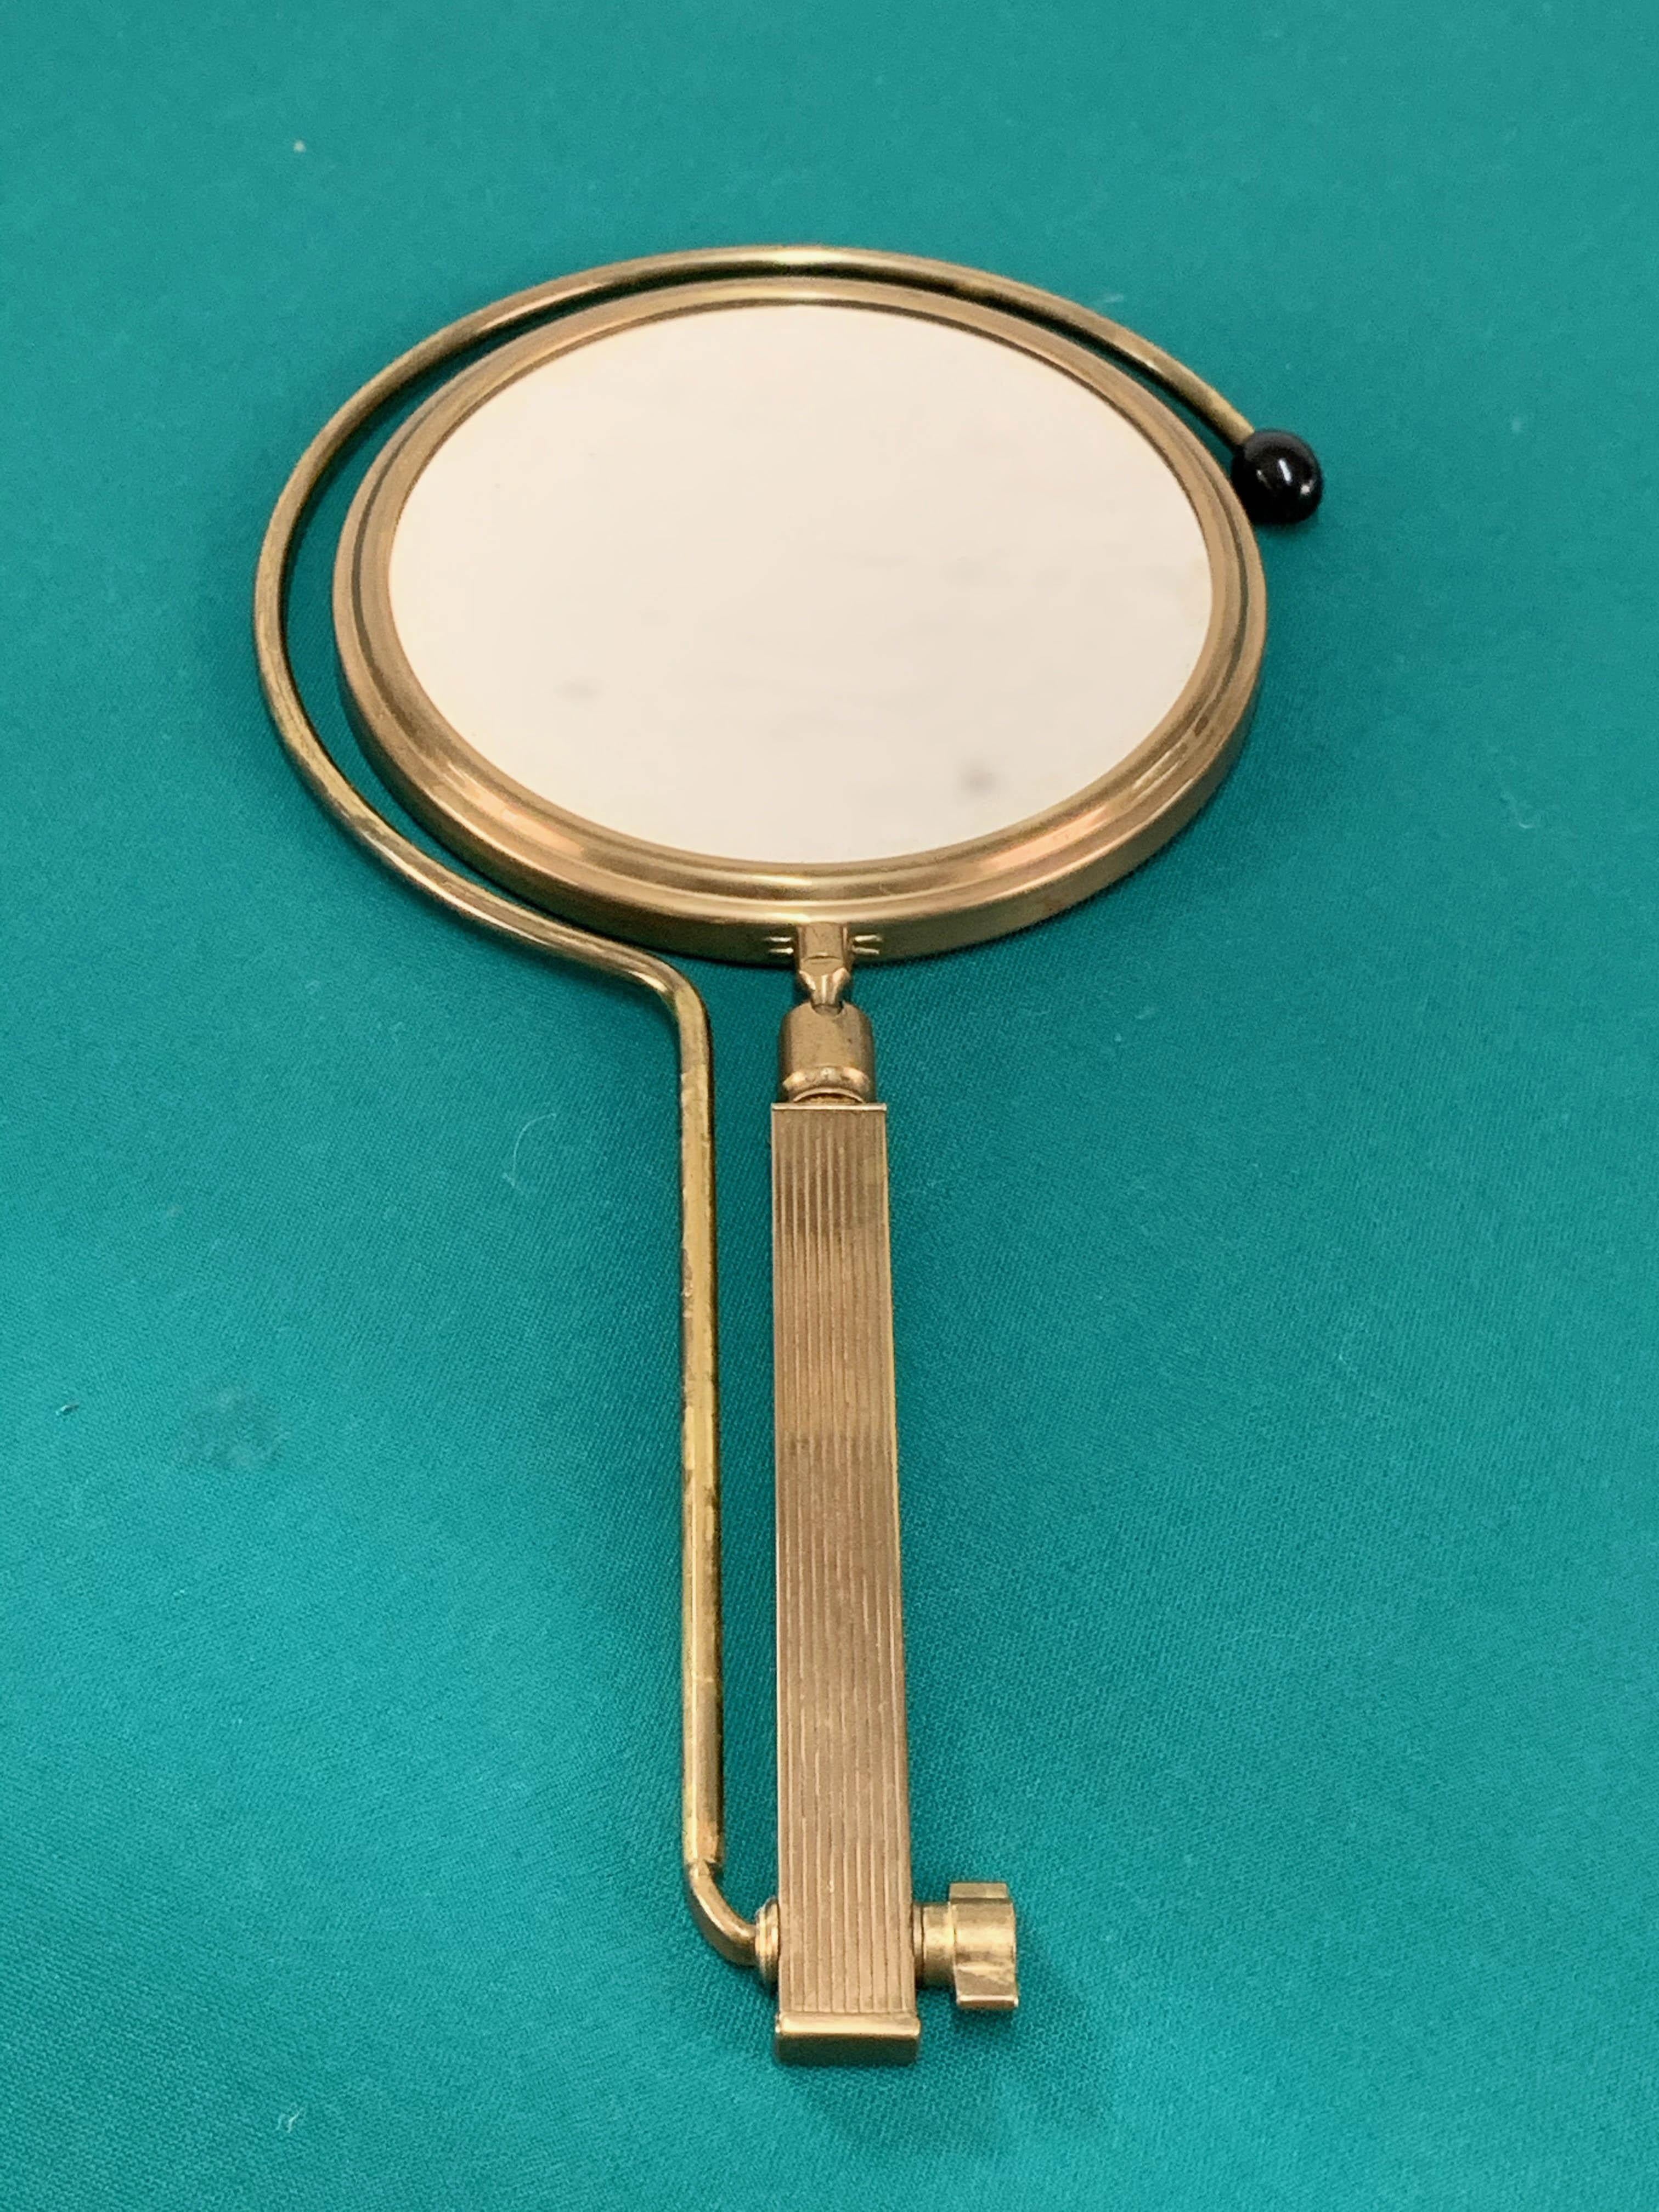 Midcentury Brass French Adjustable Table Mirror with a Two-Sides Stand, 1950s For Sale 5